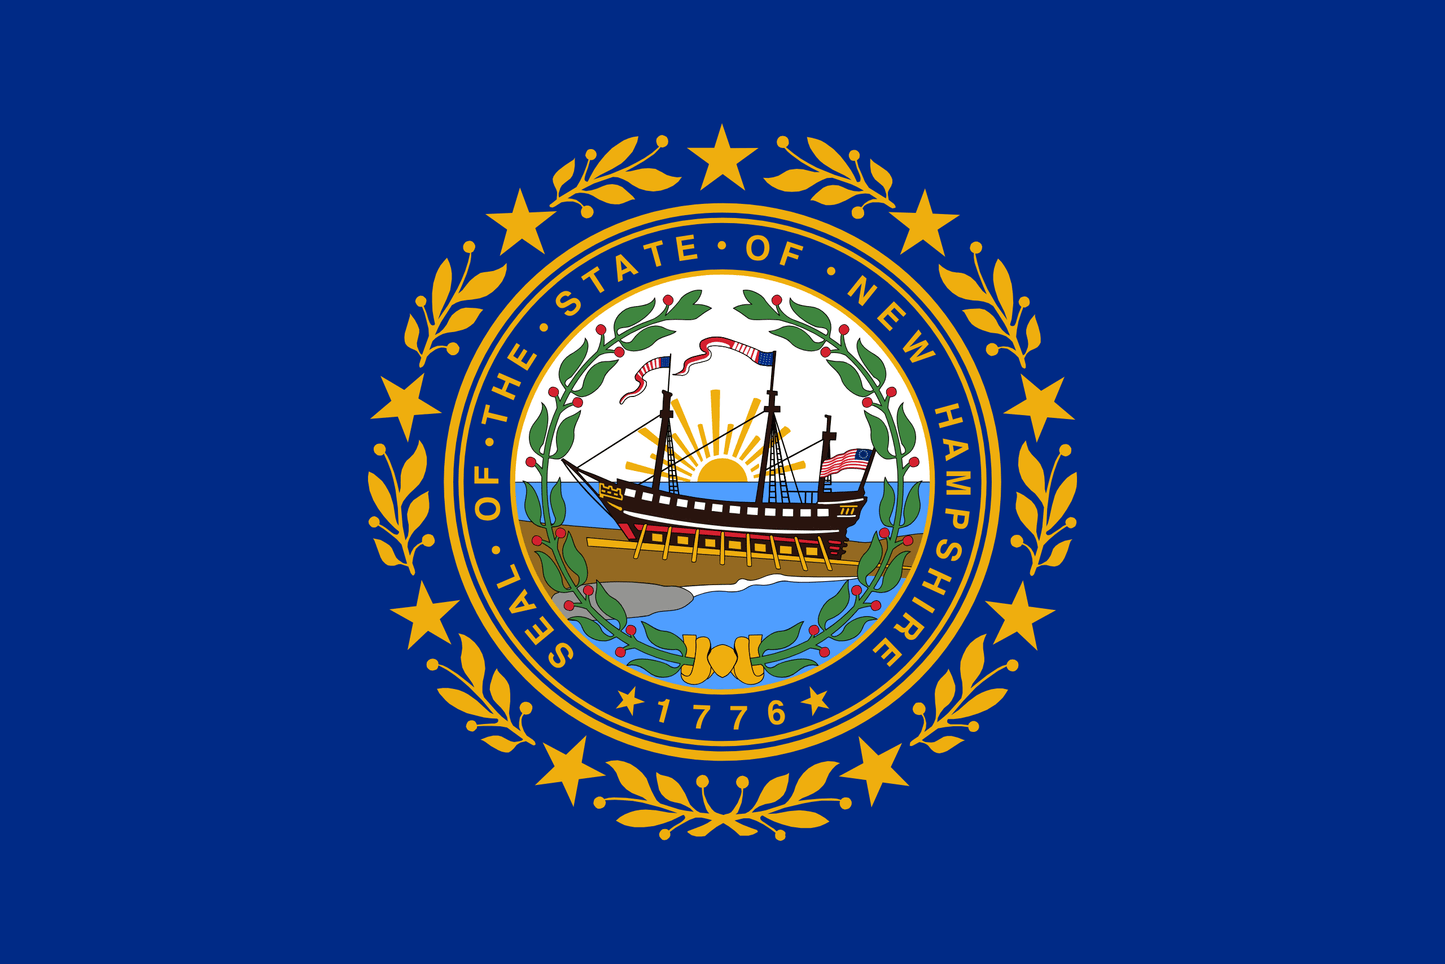 New Hampshire State Flag - 2x3 Feet